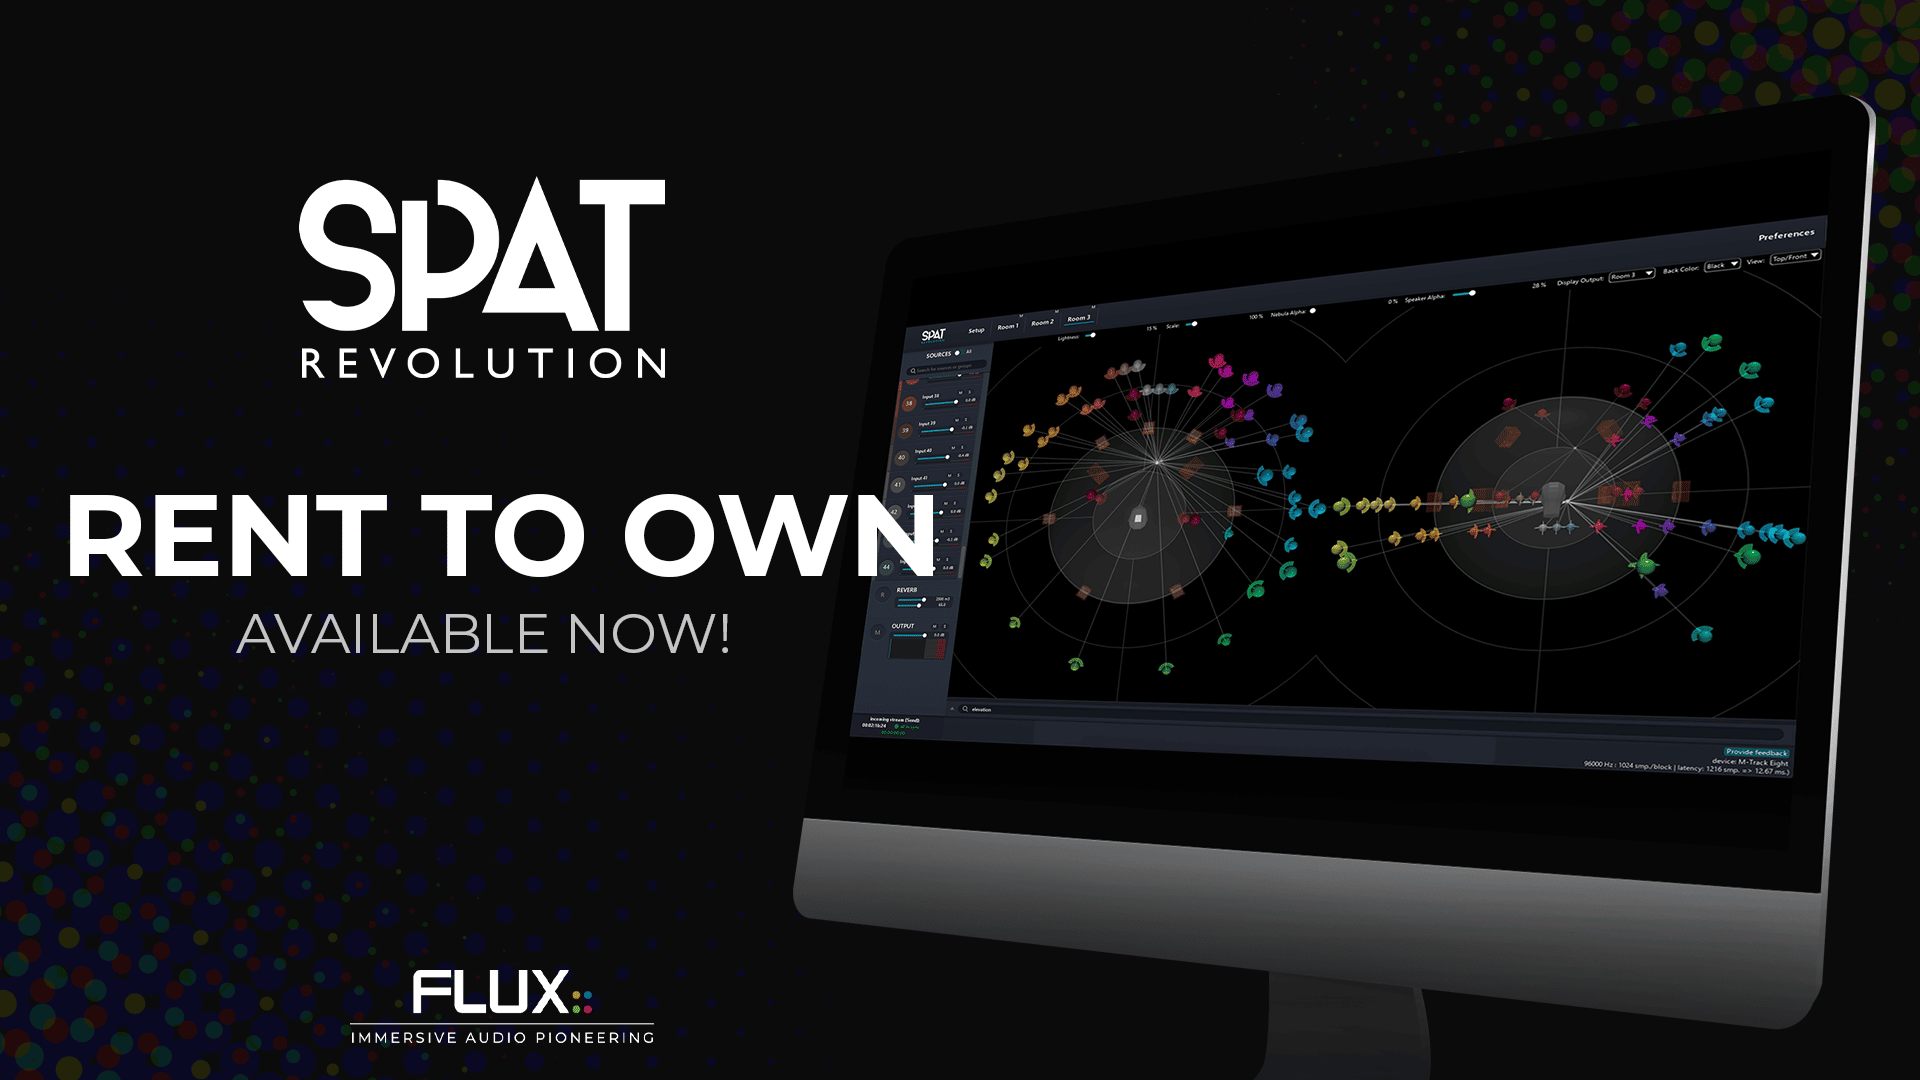 SPAT Revolution - Rent To Own